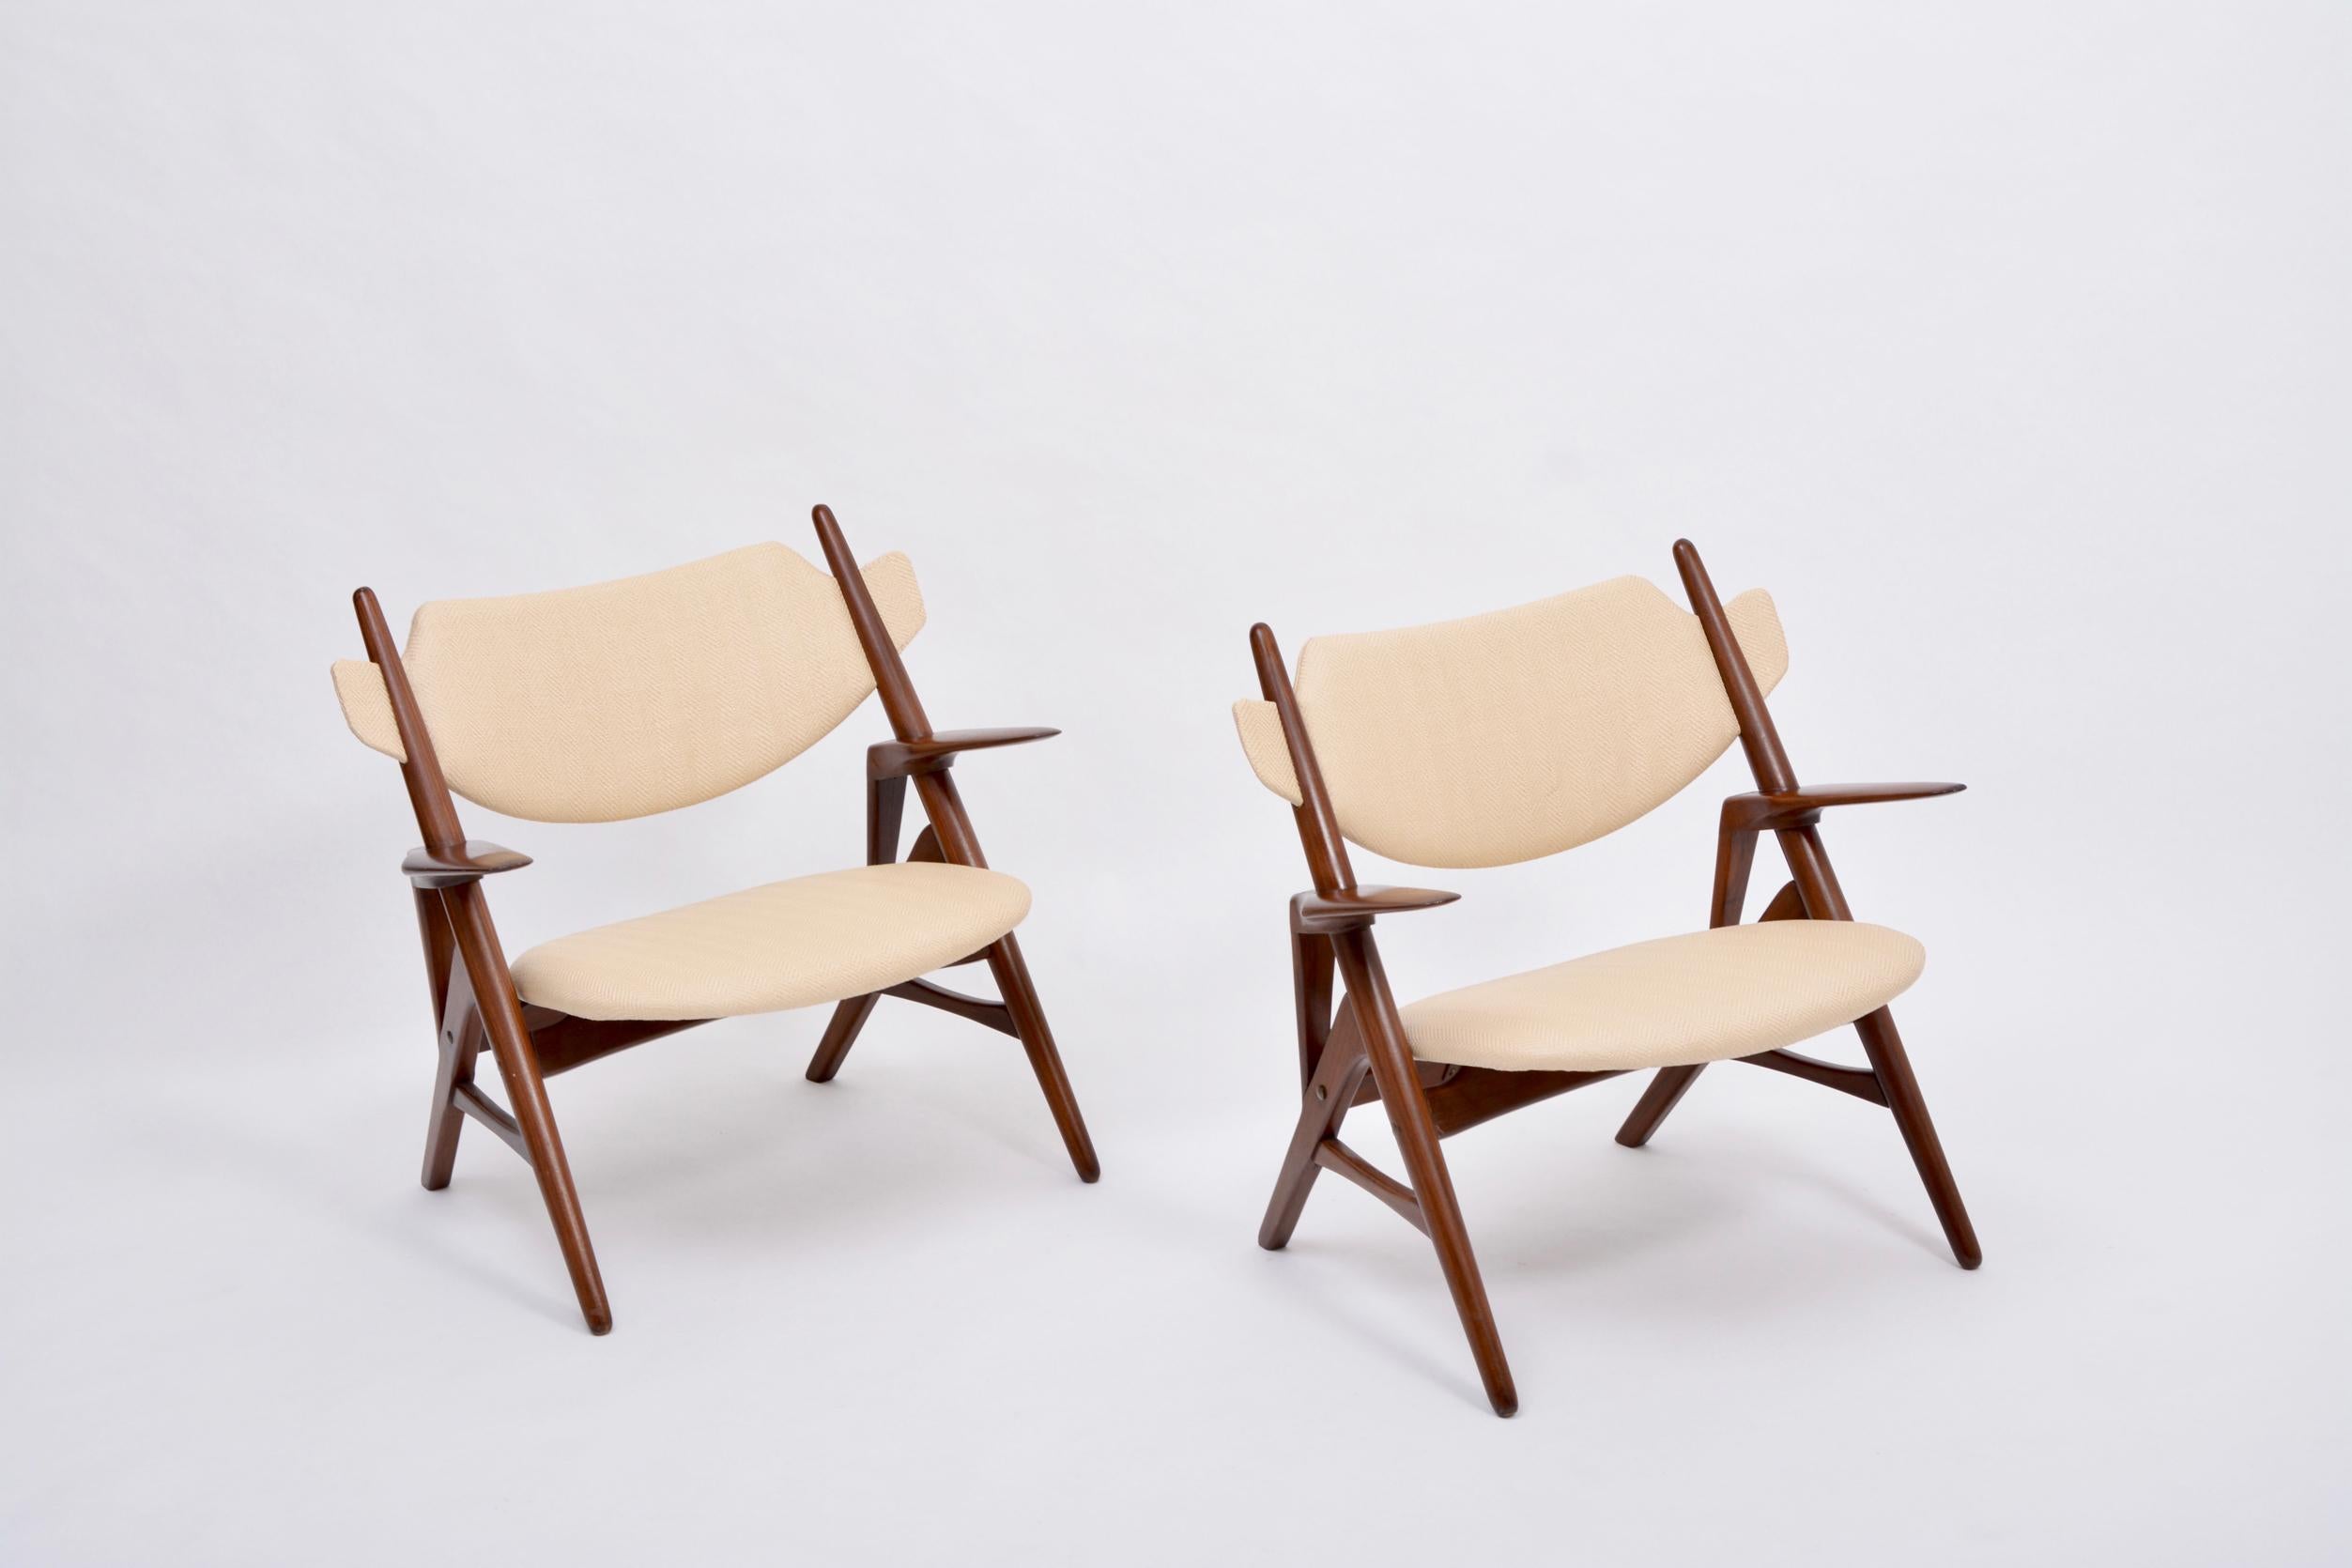 Pair of Reupholstered Mid-Century Modern Chairs  2